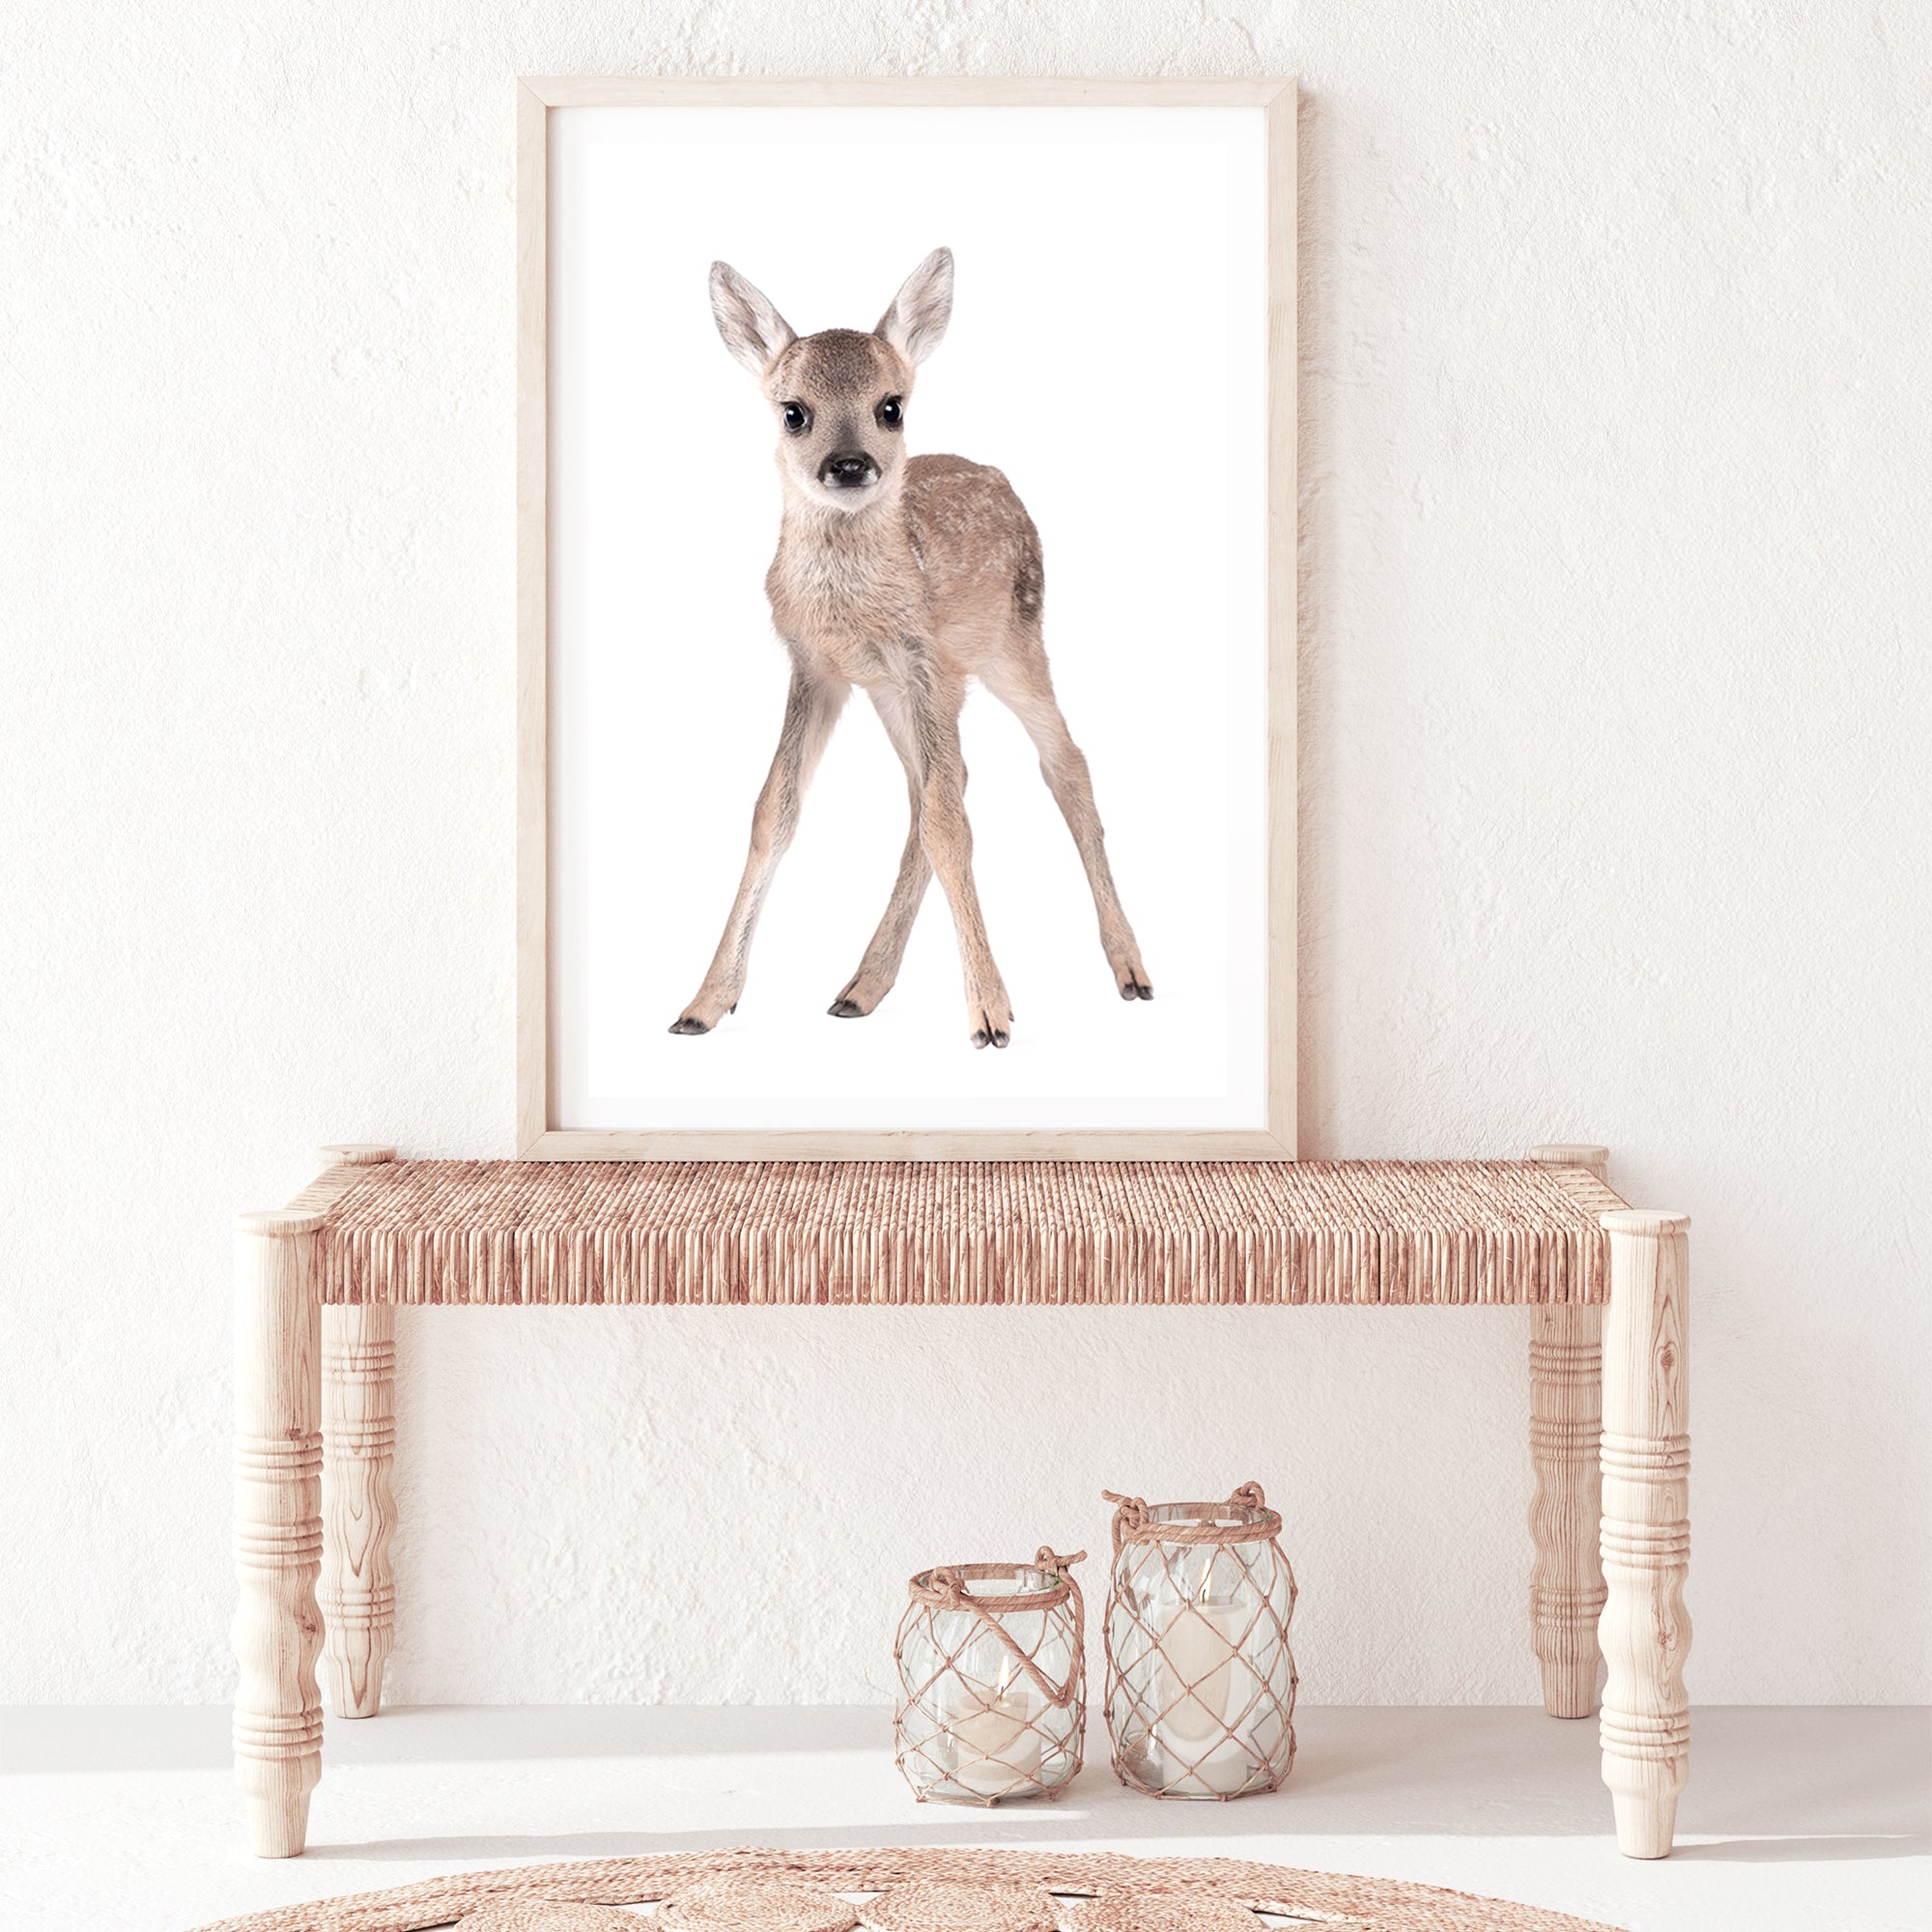 Stunning Animal Baby Deer photo art print, available in an unframed poster print, stretched canvas or with a timber, white or black frame.